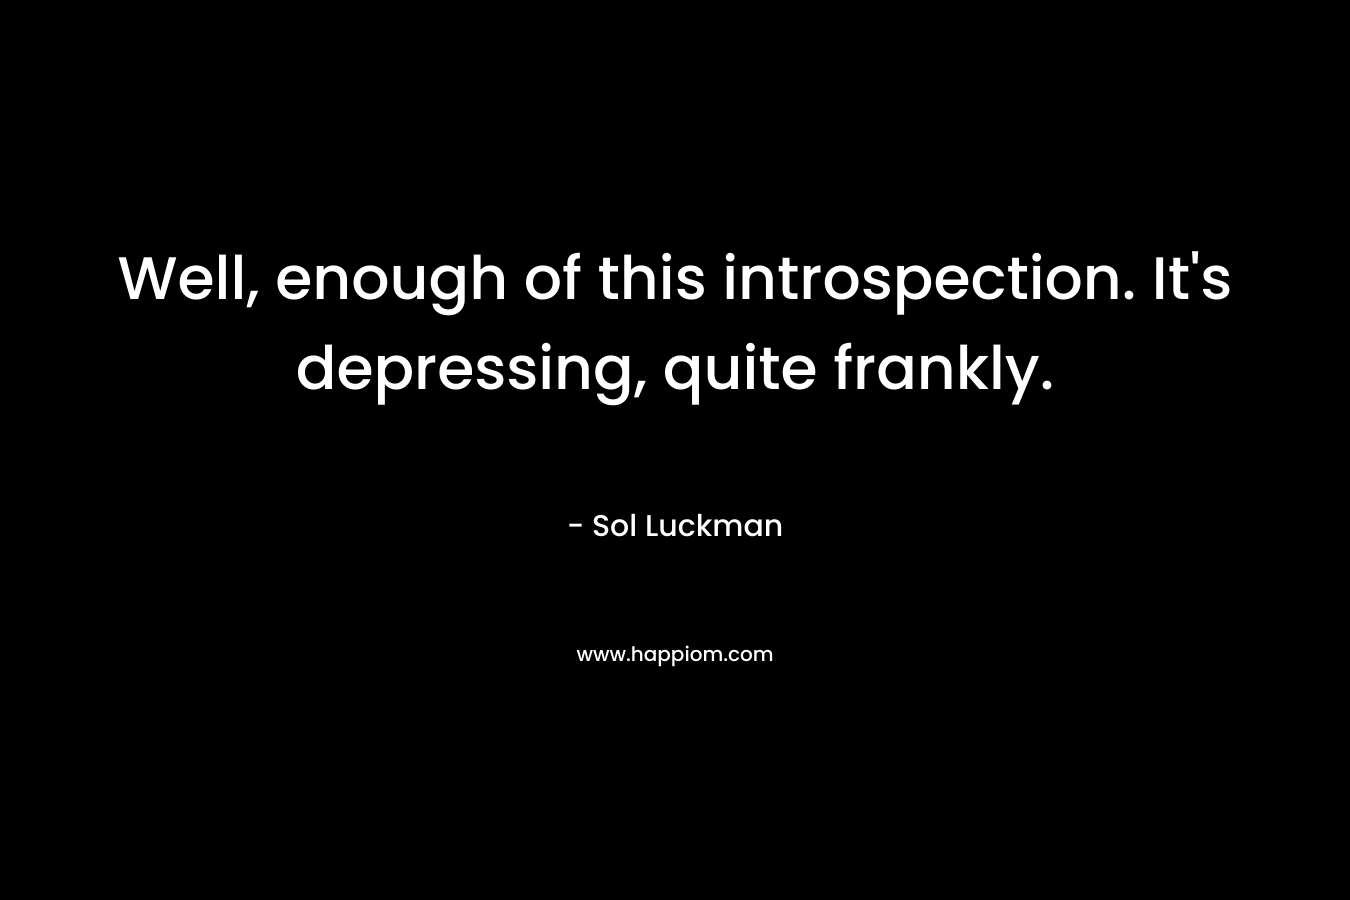 Well, enough of this introspection. It’s depressing, quite frankly. – Sol Luckman